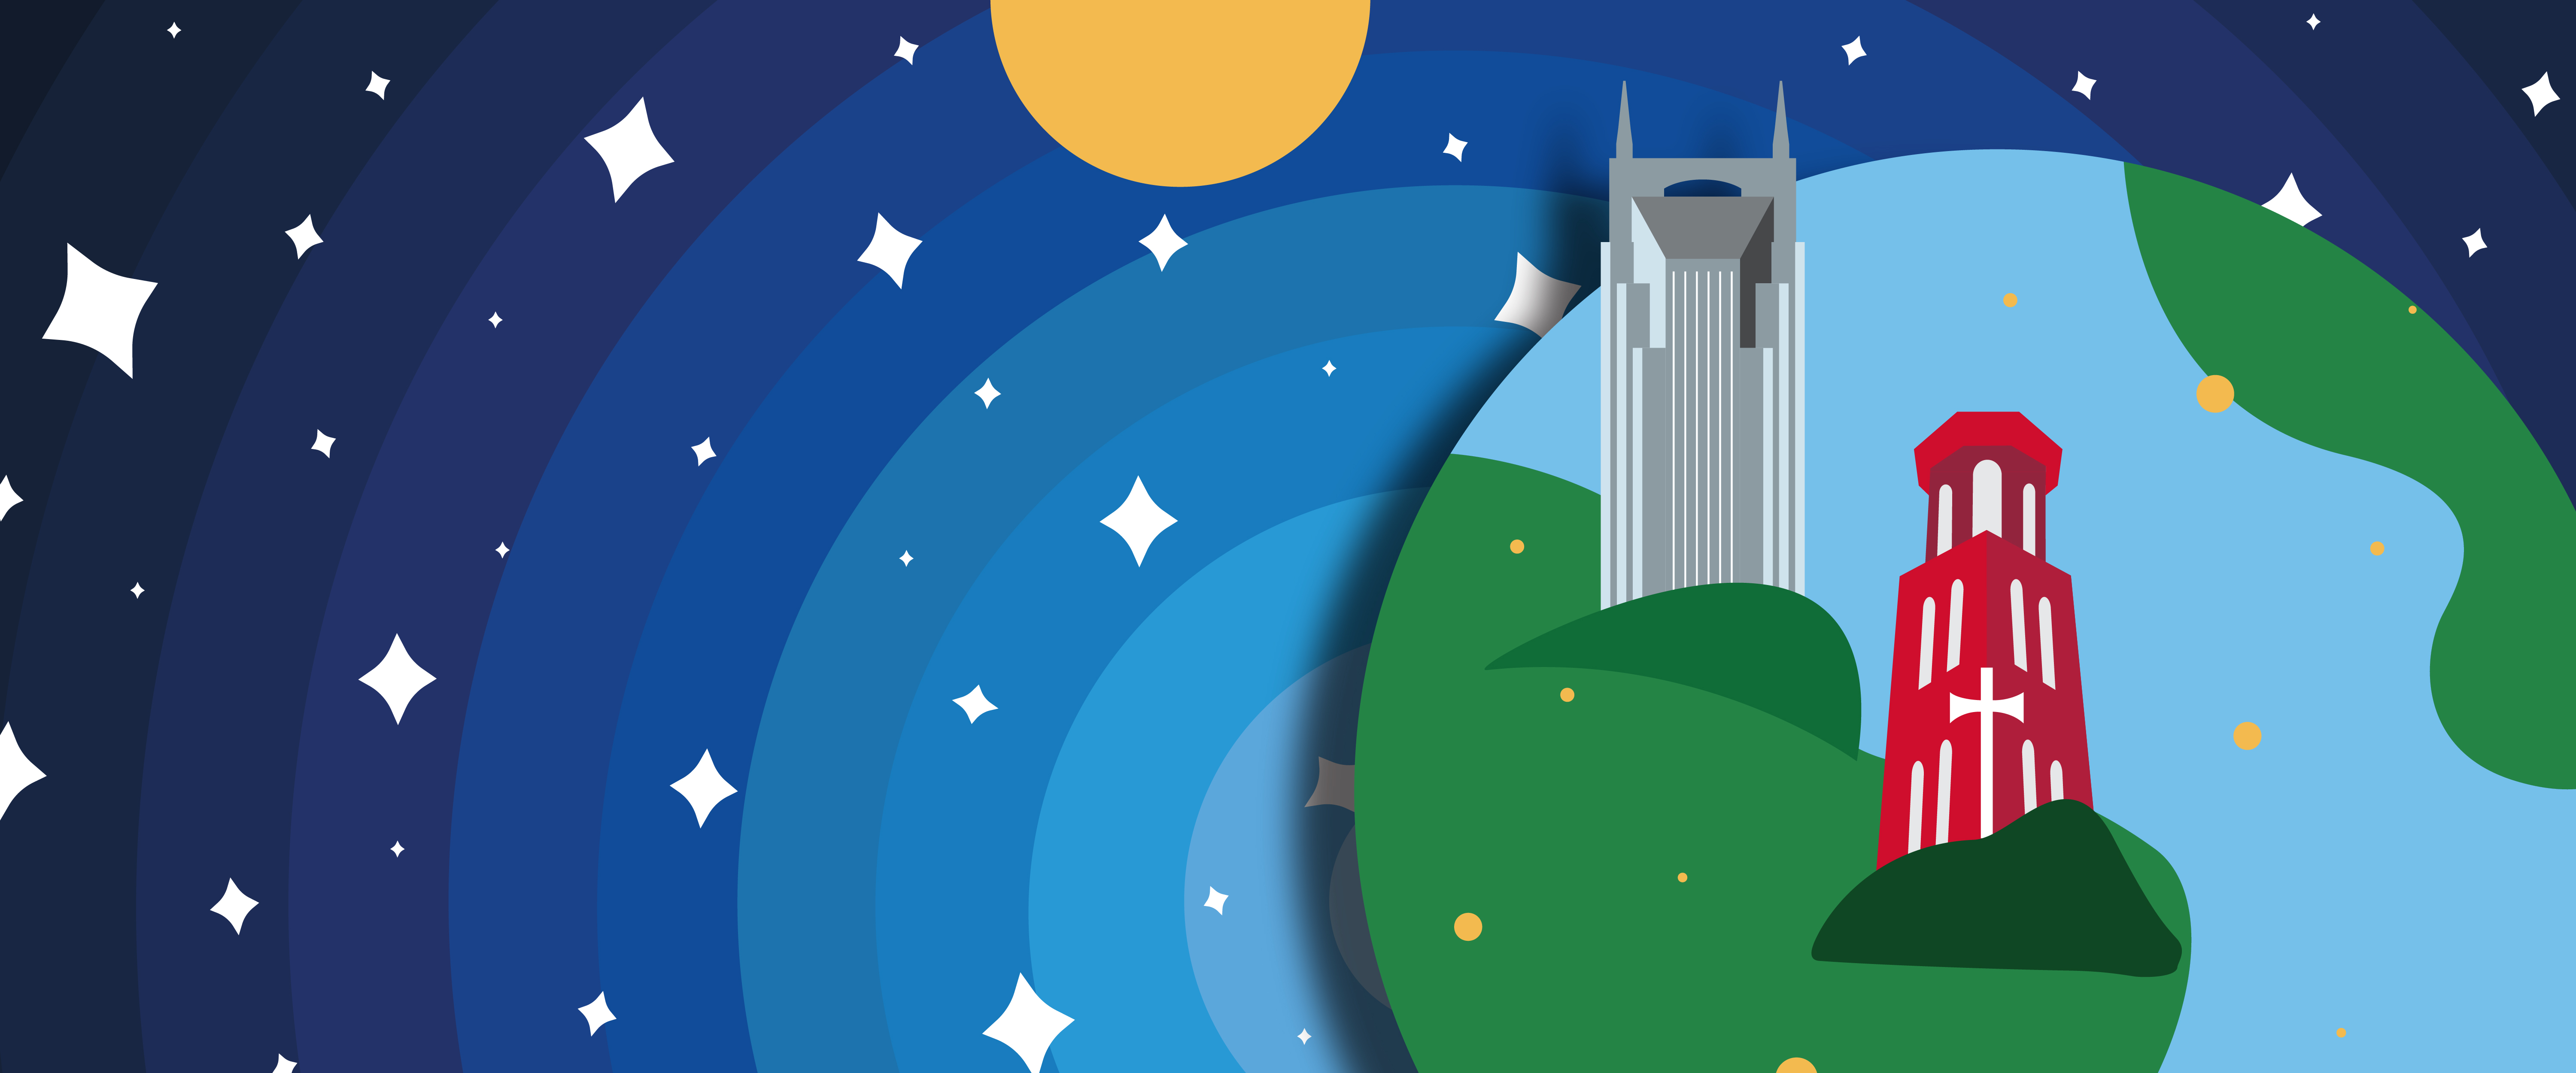 And illustration the planet earth with a Belmont University's Bell Tower and the Nashville AT&T tower on it's surface